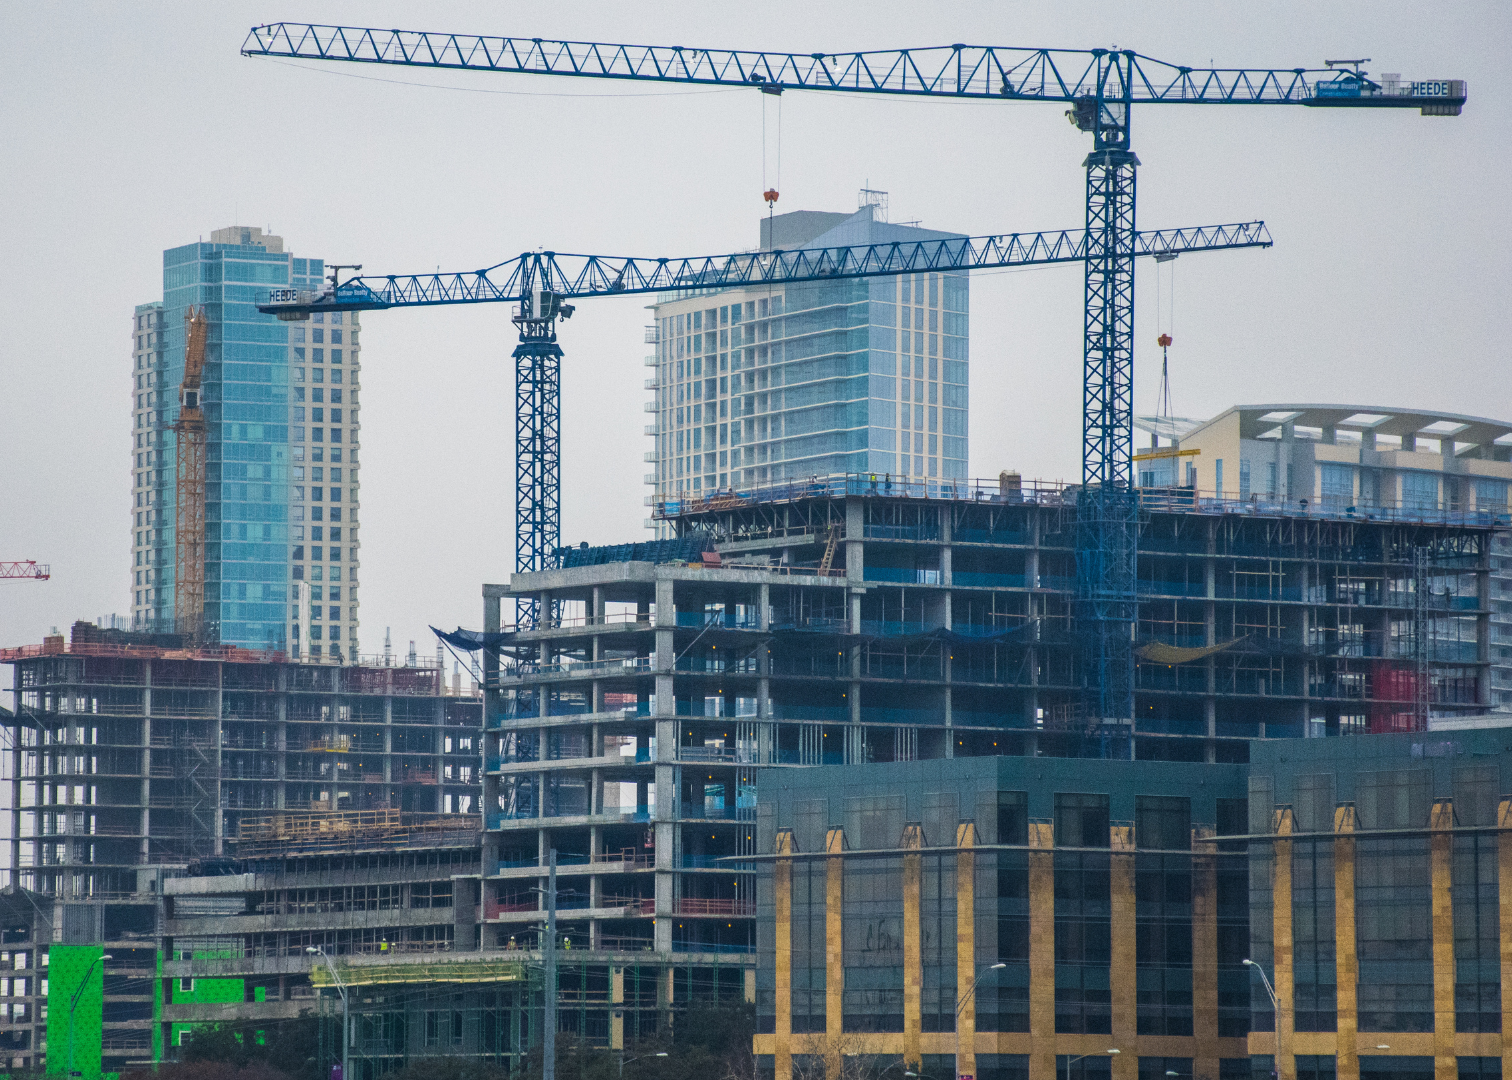 Portion of the Austin skyline with construction machines building a new skyscraper. Center of the frame is a crane over a building with two other buildings in the background. The sky is light gray.